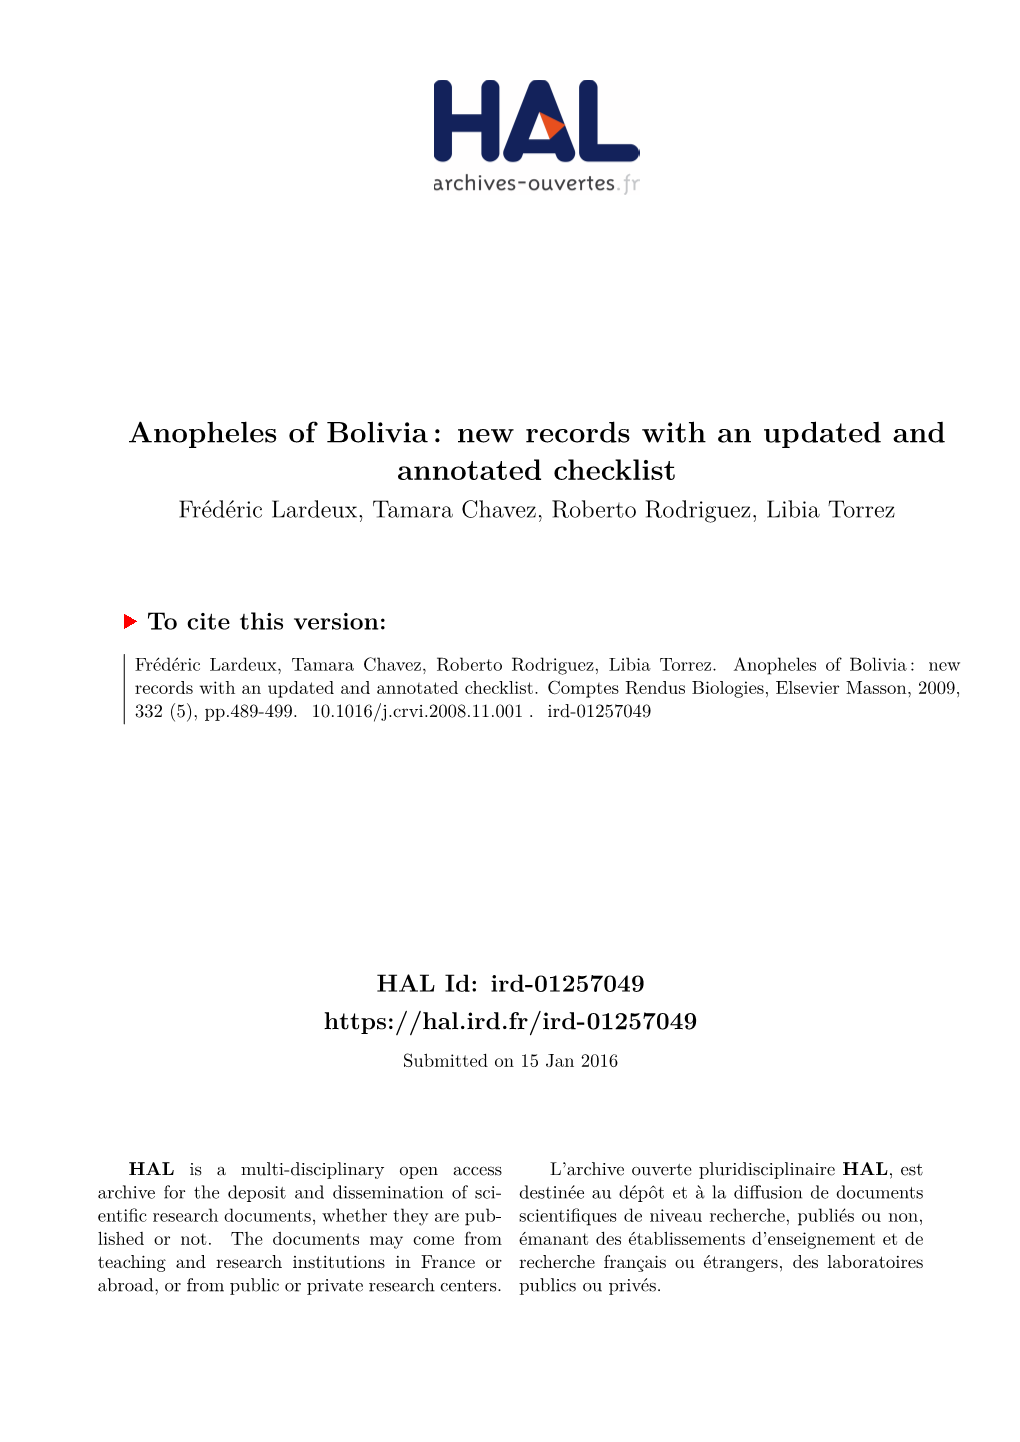 Anopheles of Bolivia: New Records with an Updated and Annotated Checklist